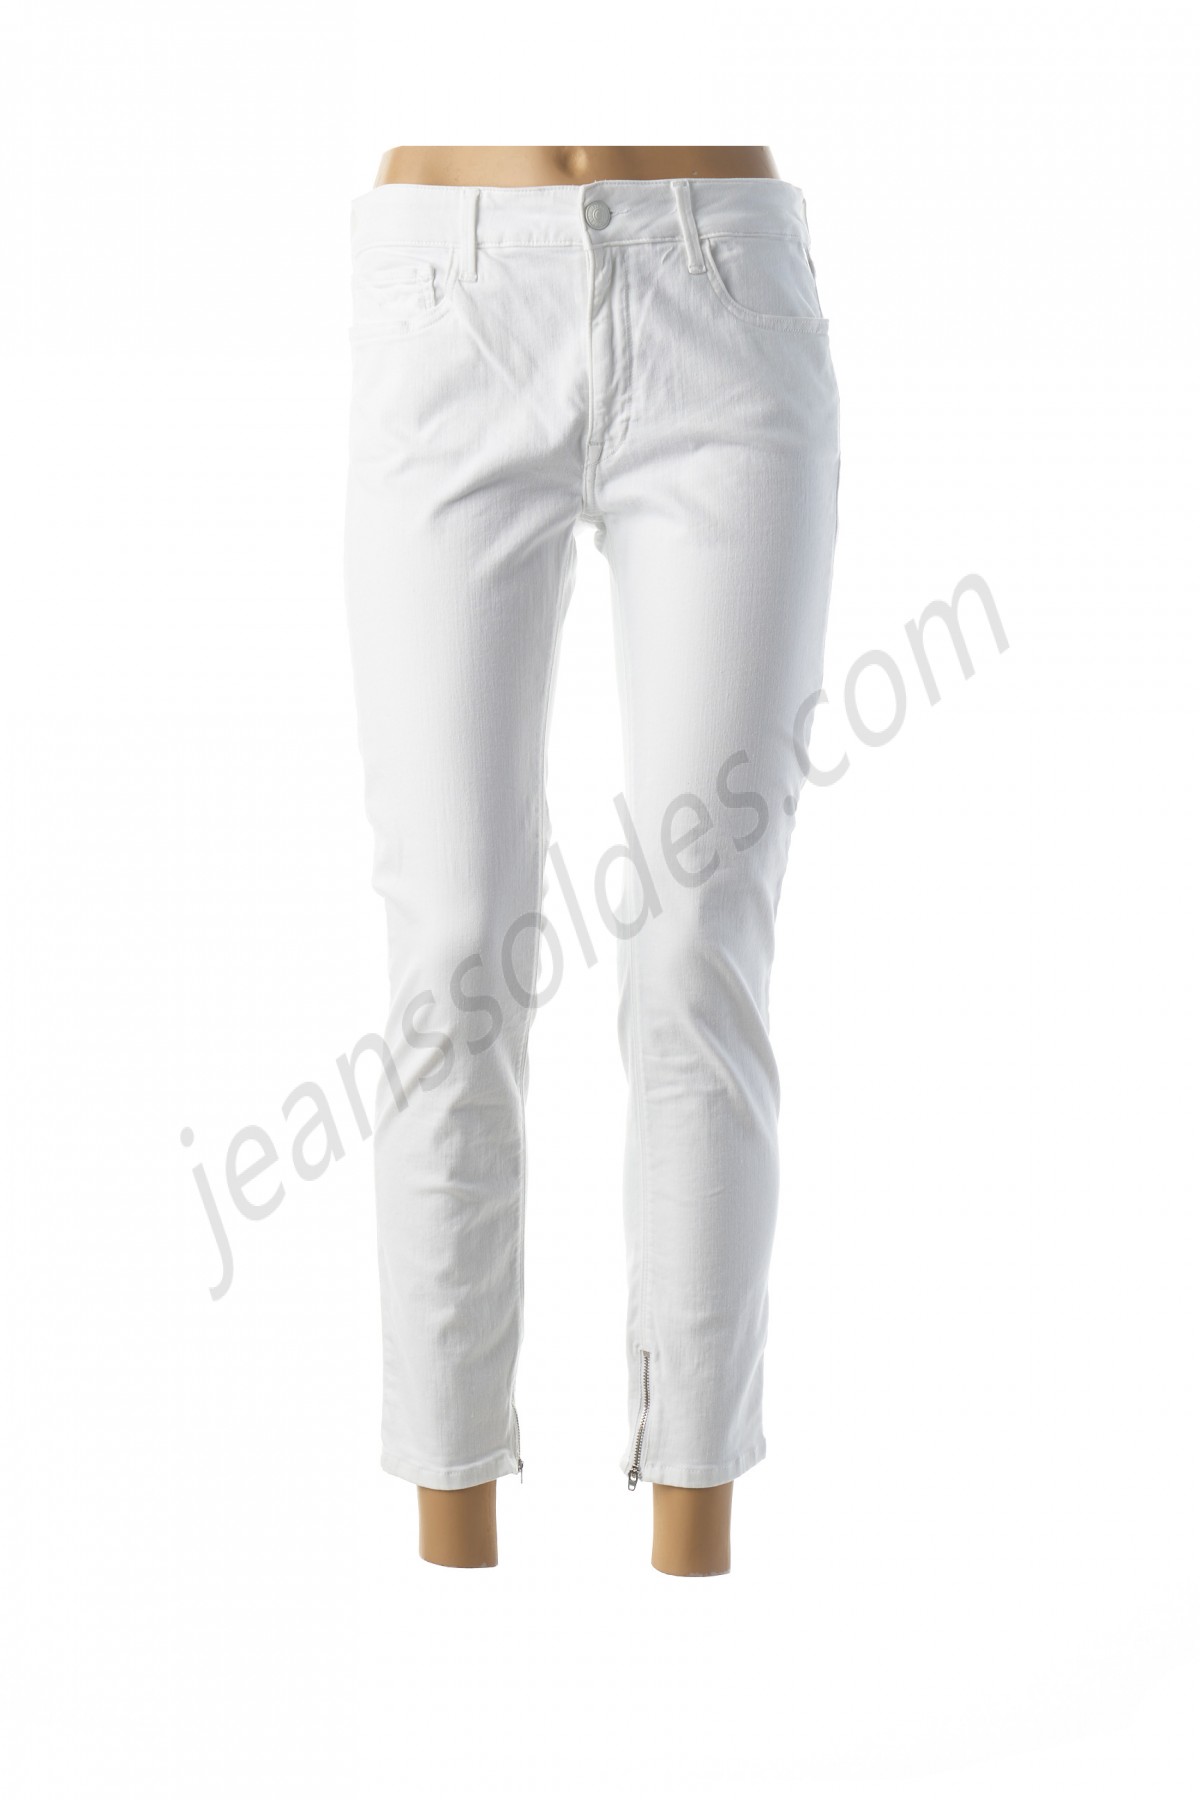 replay-Jeans coupe slim prix d’amis - -0